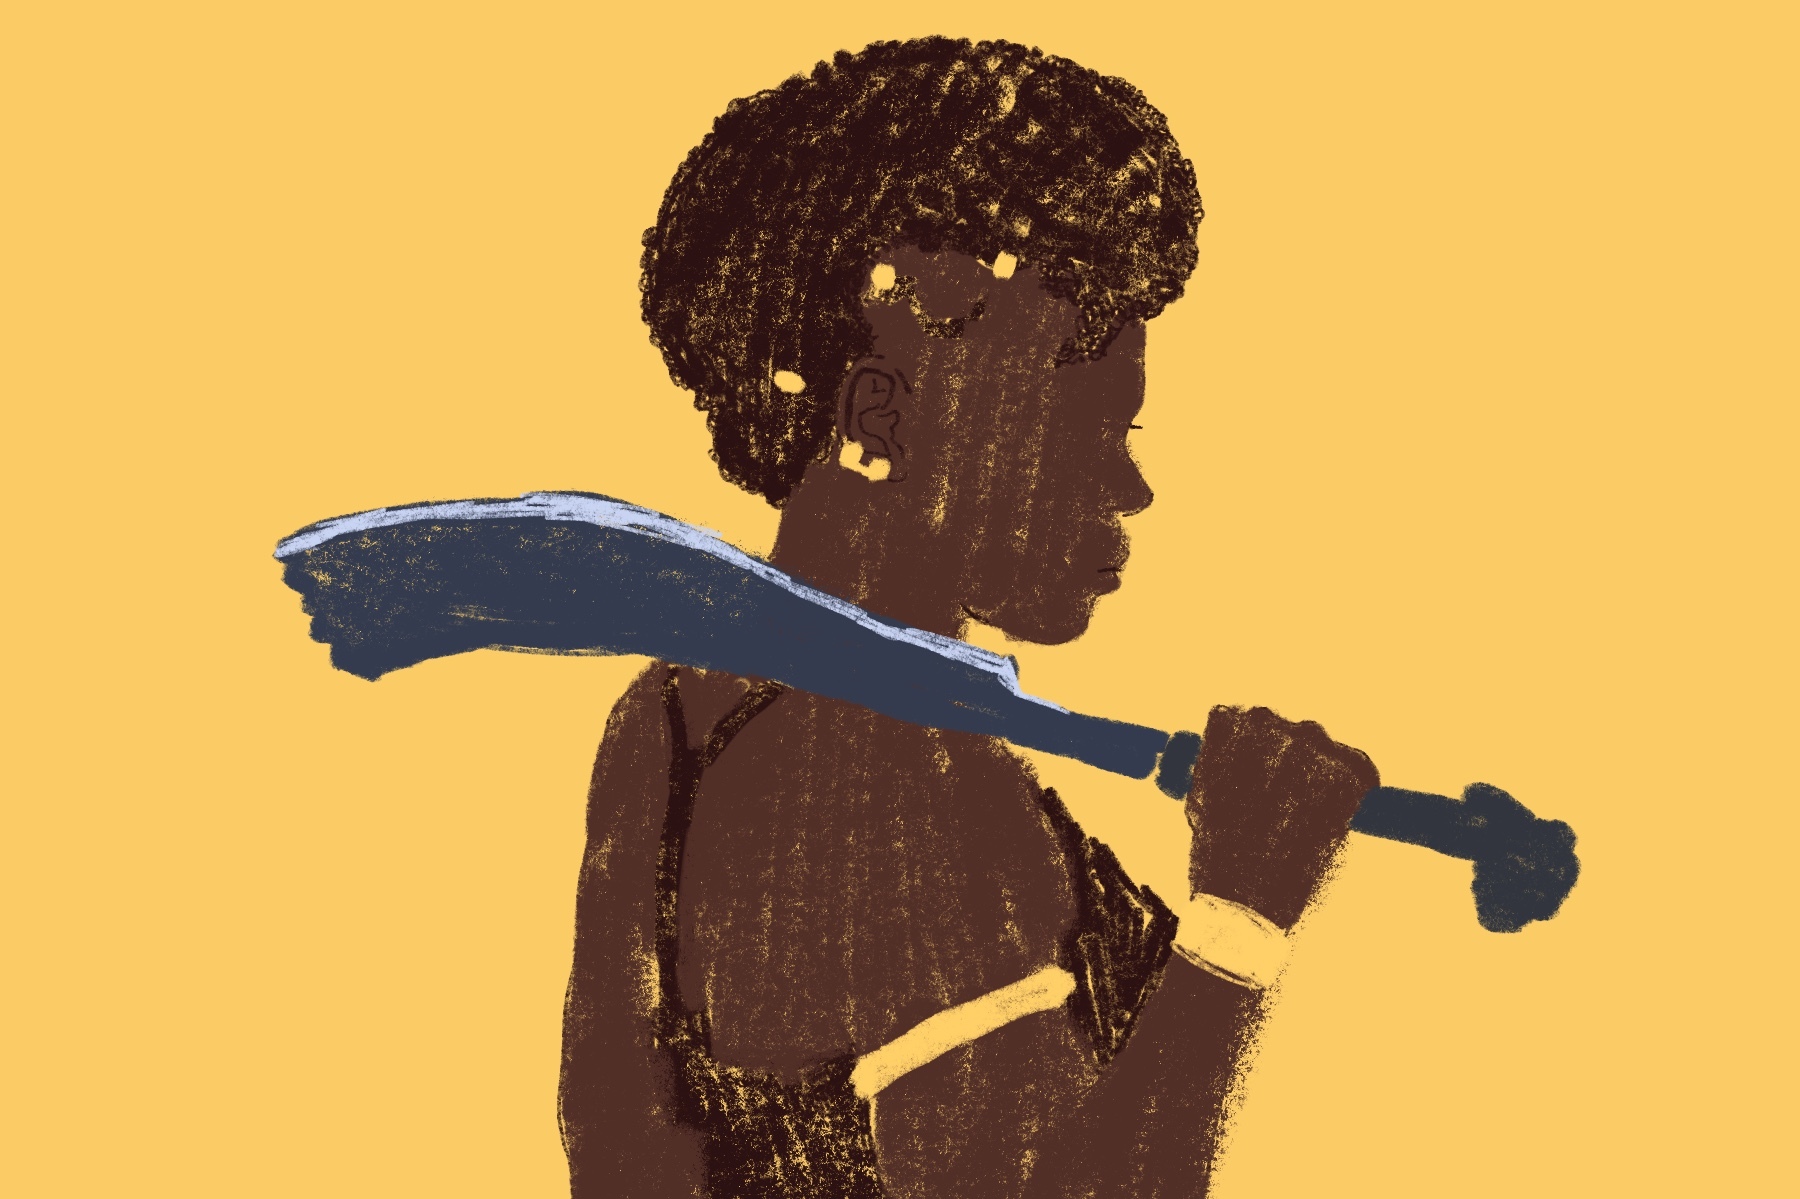 In an article about The Woman King, illustration of Viola Davis' character